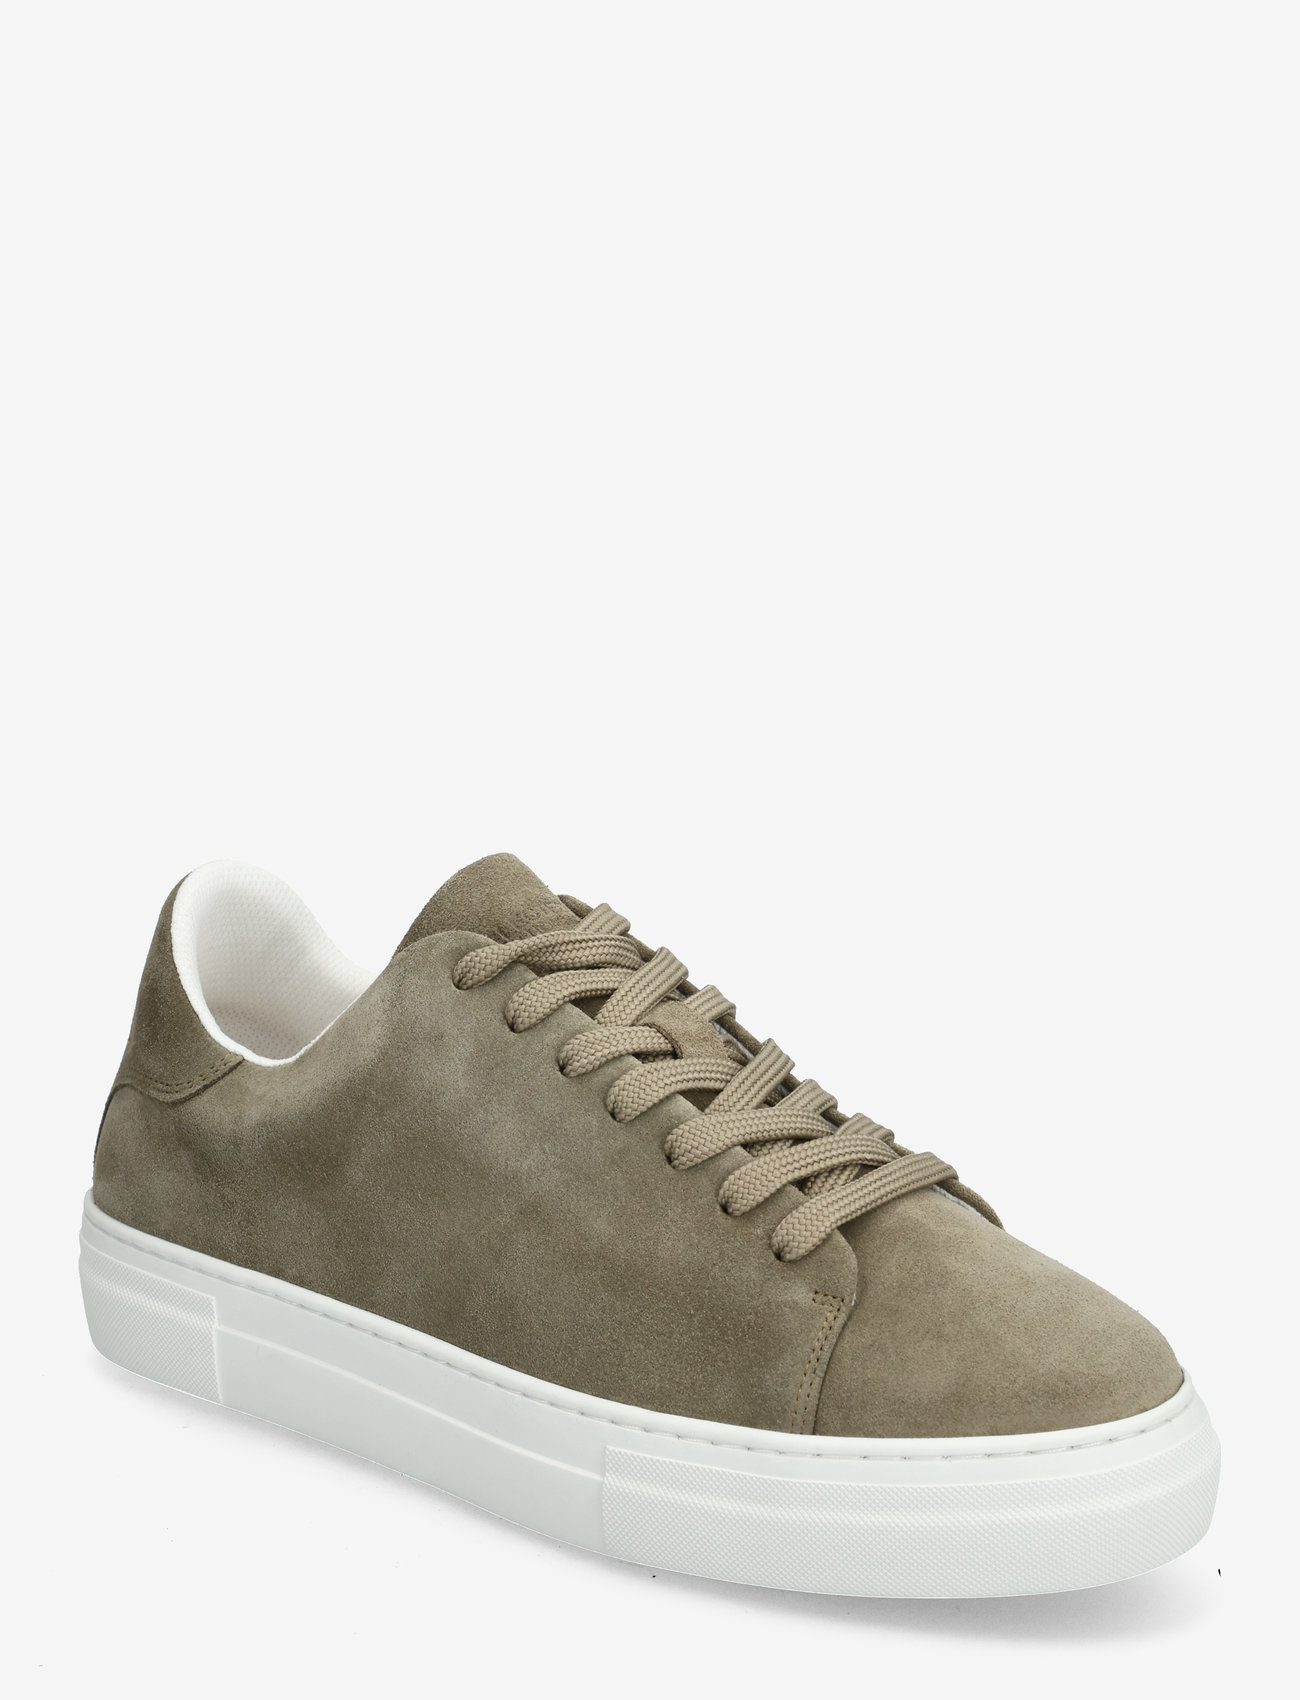 Selected Homme - SLHDAVID CHUNKY CLEAN SUEDE TRAINER B - låga sneakers - grape leaf - 0